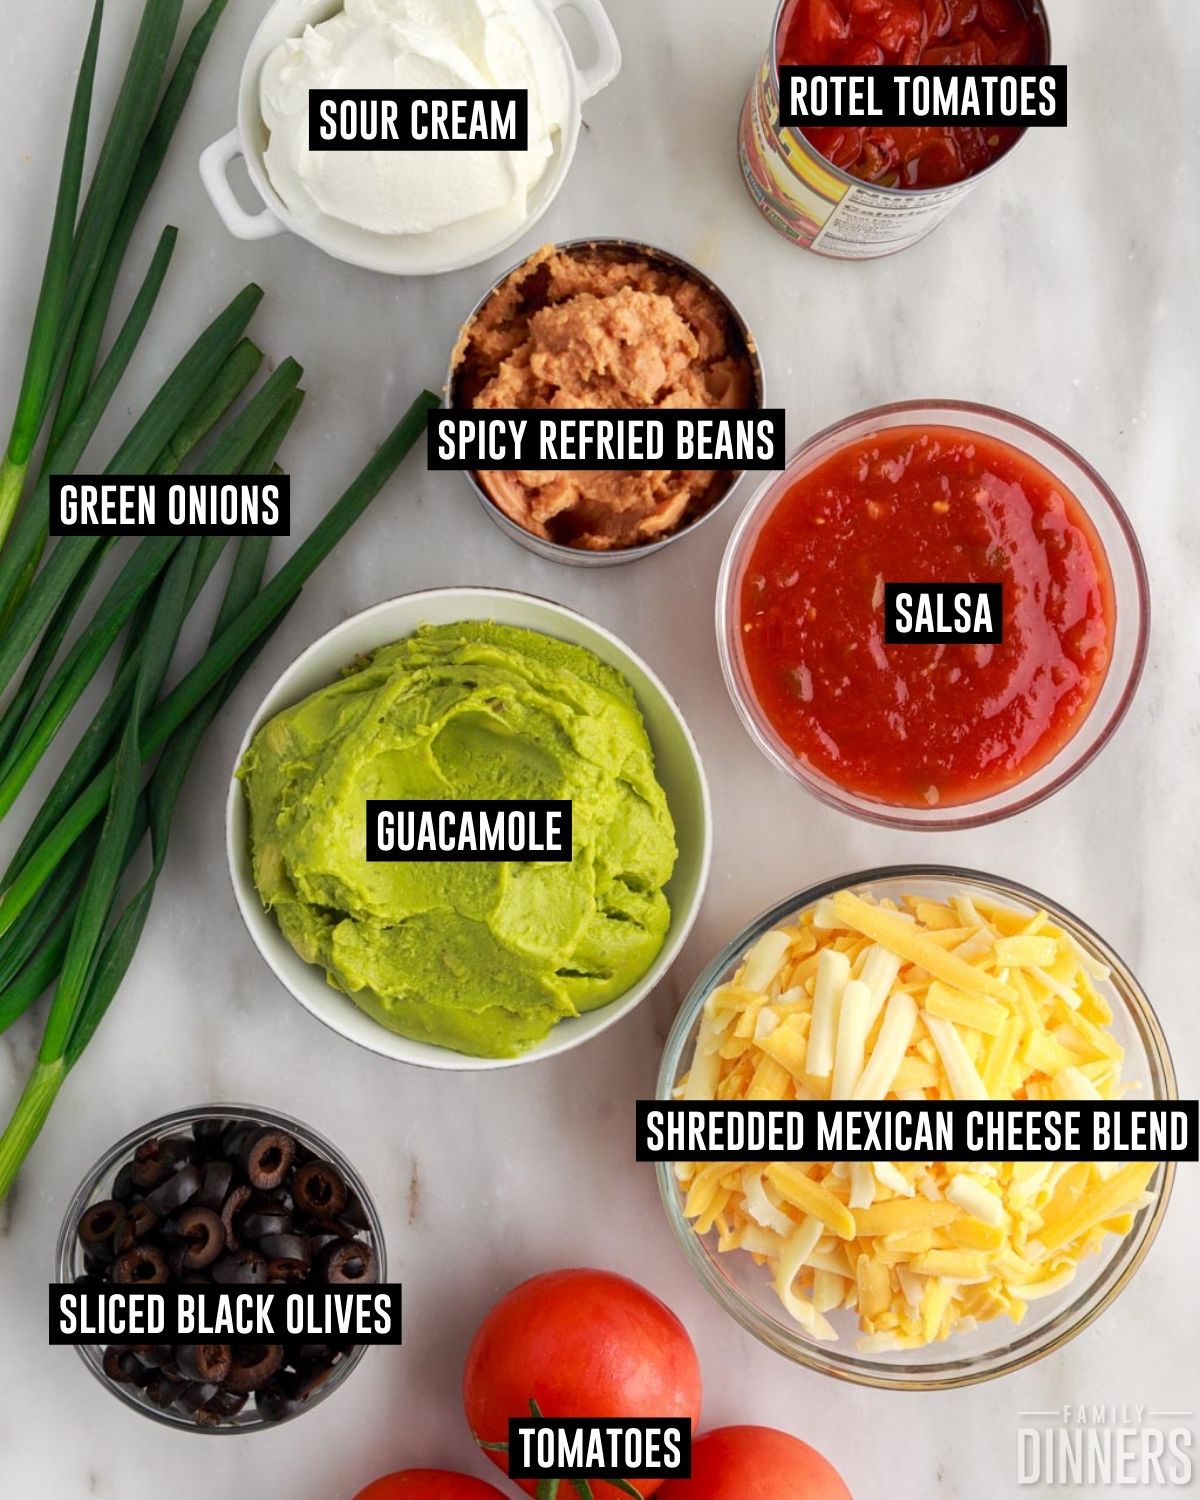 7 layer dip ingredients in containers including: shredded cheese, canned Rotel, salsa, tomatoes, sliced black olives, guacamole, spicy refried beans, sour cream, green onions.